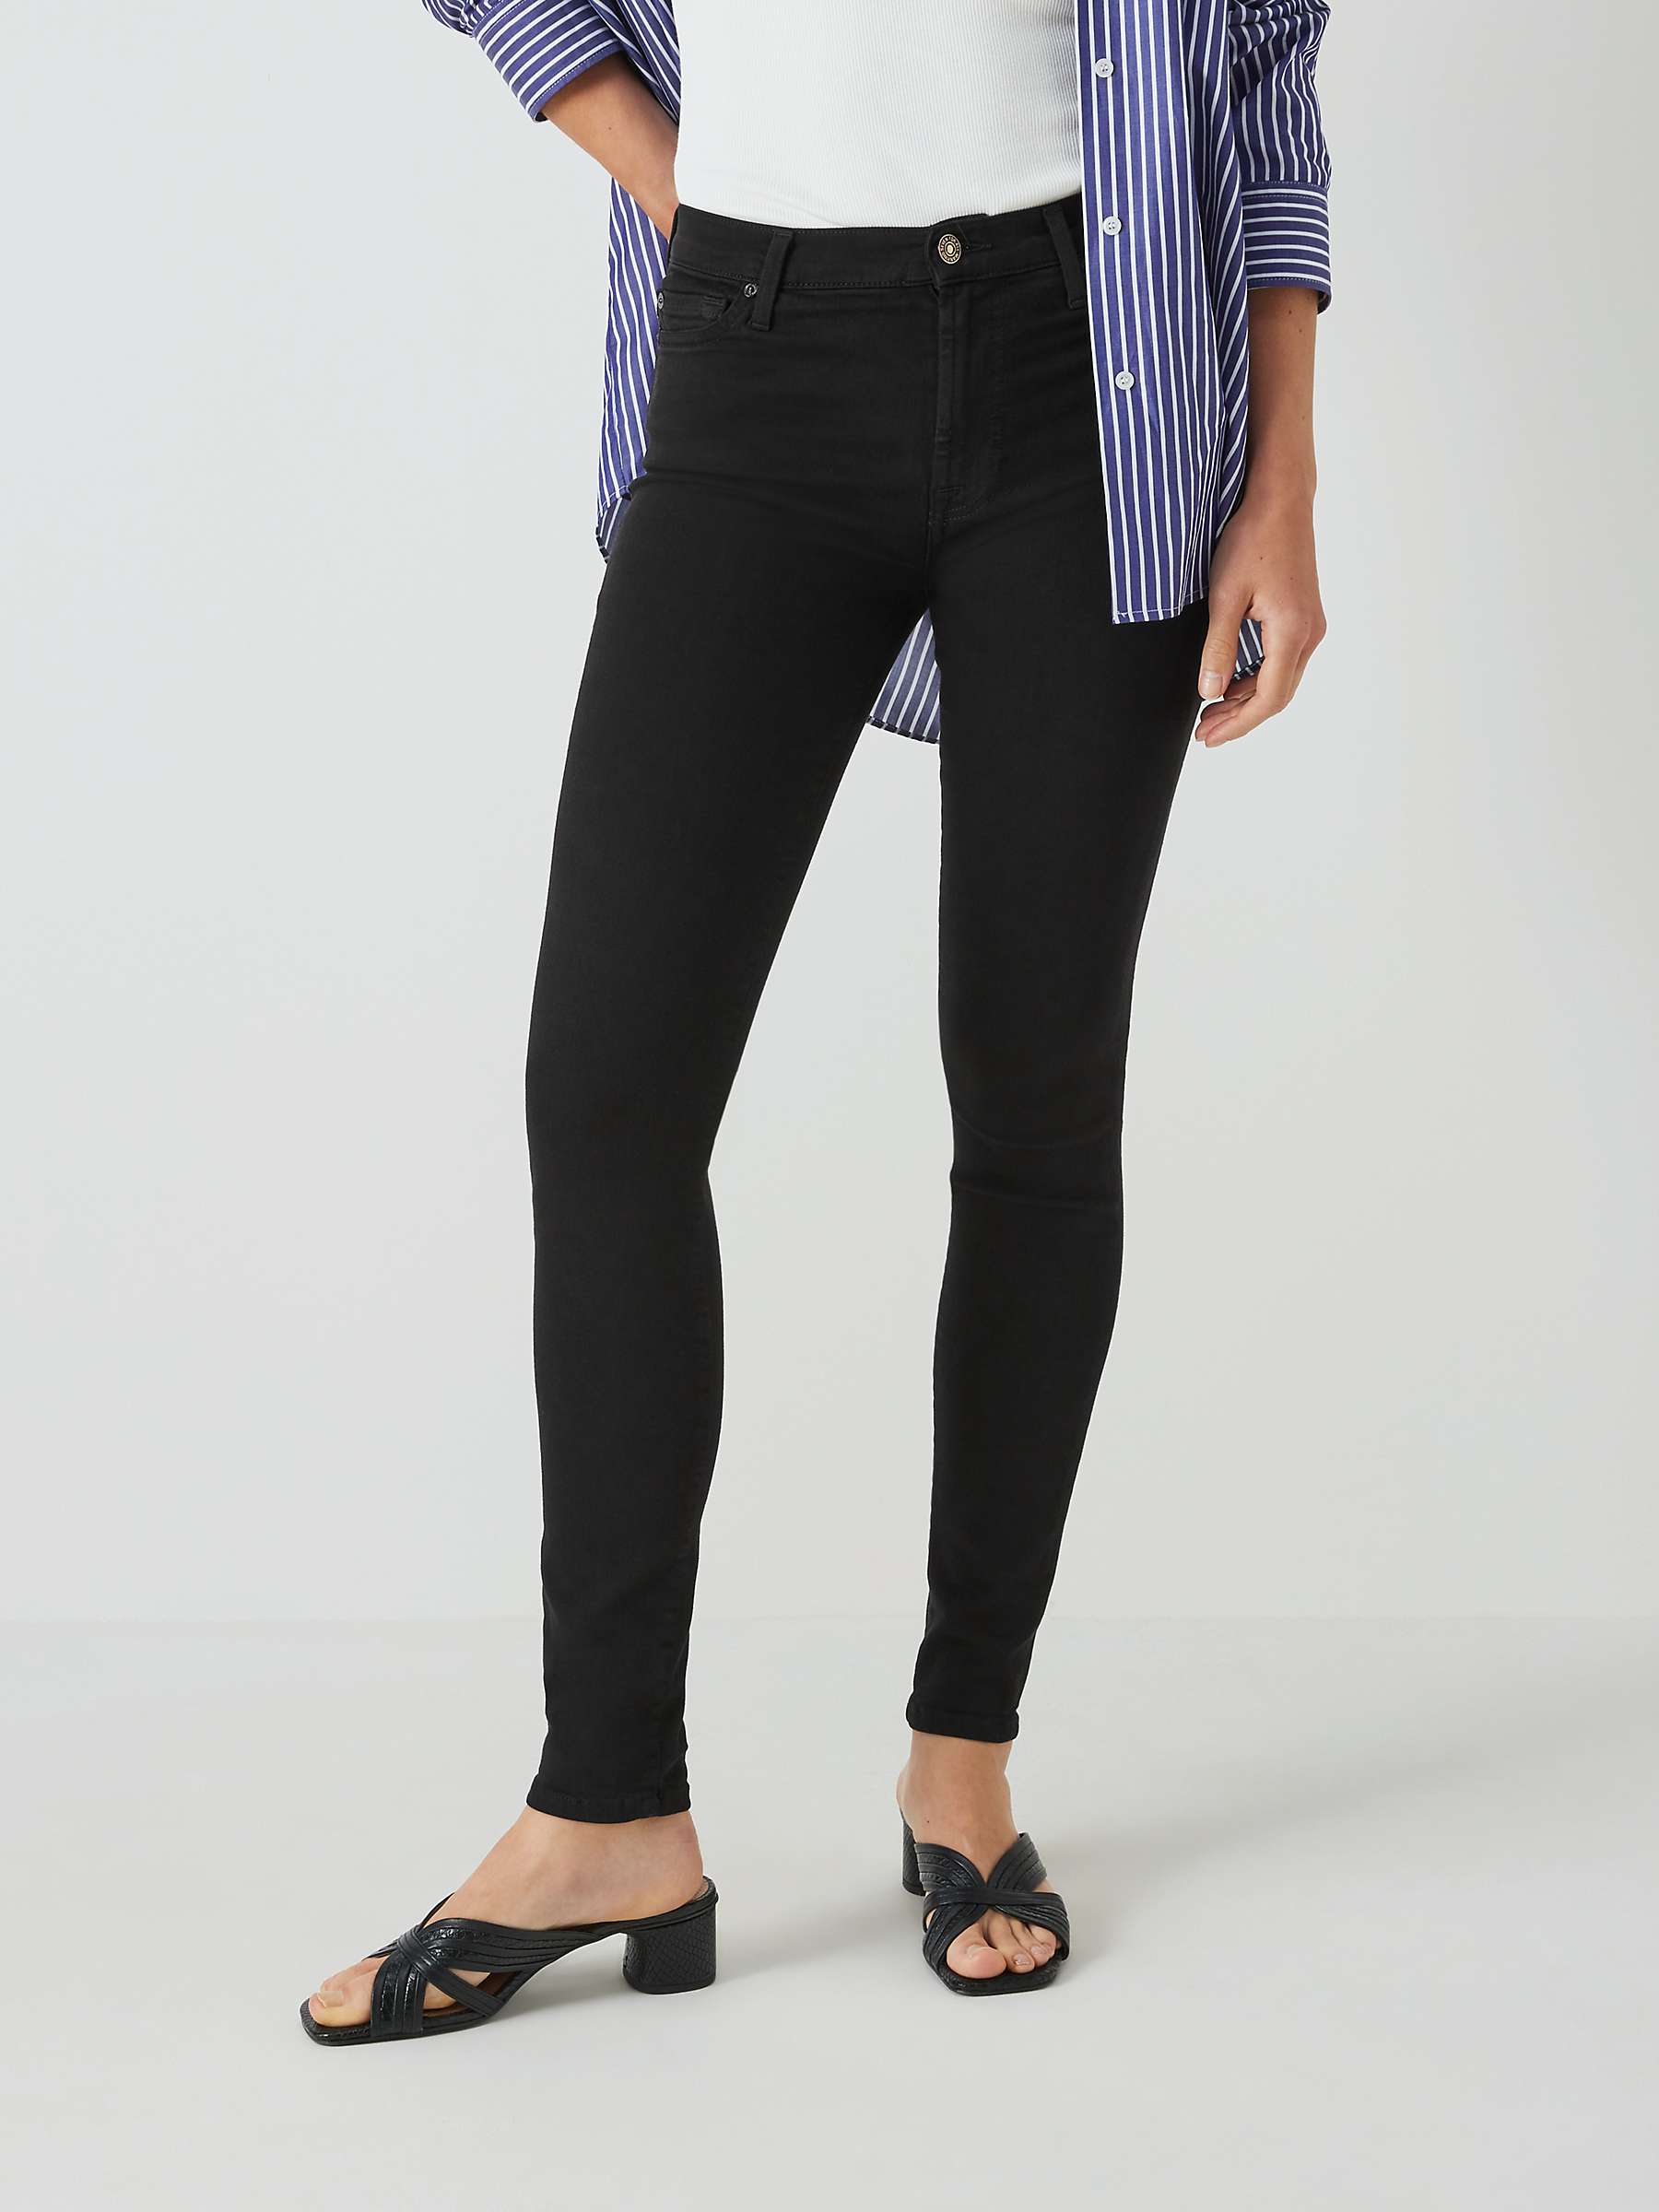 Buy 7 For All Mankind Skinny Slim Illusion Luxe Jeans, Rinse Black Online at johnlewis.com